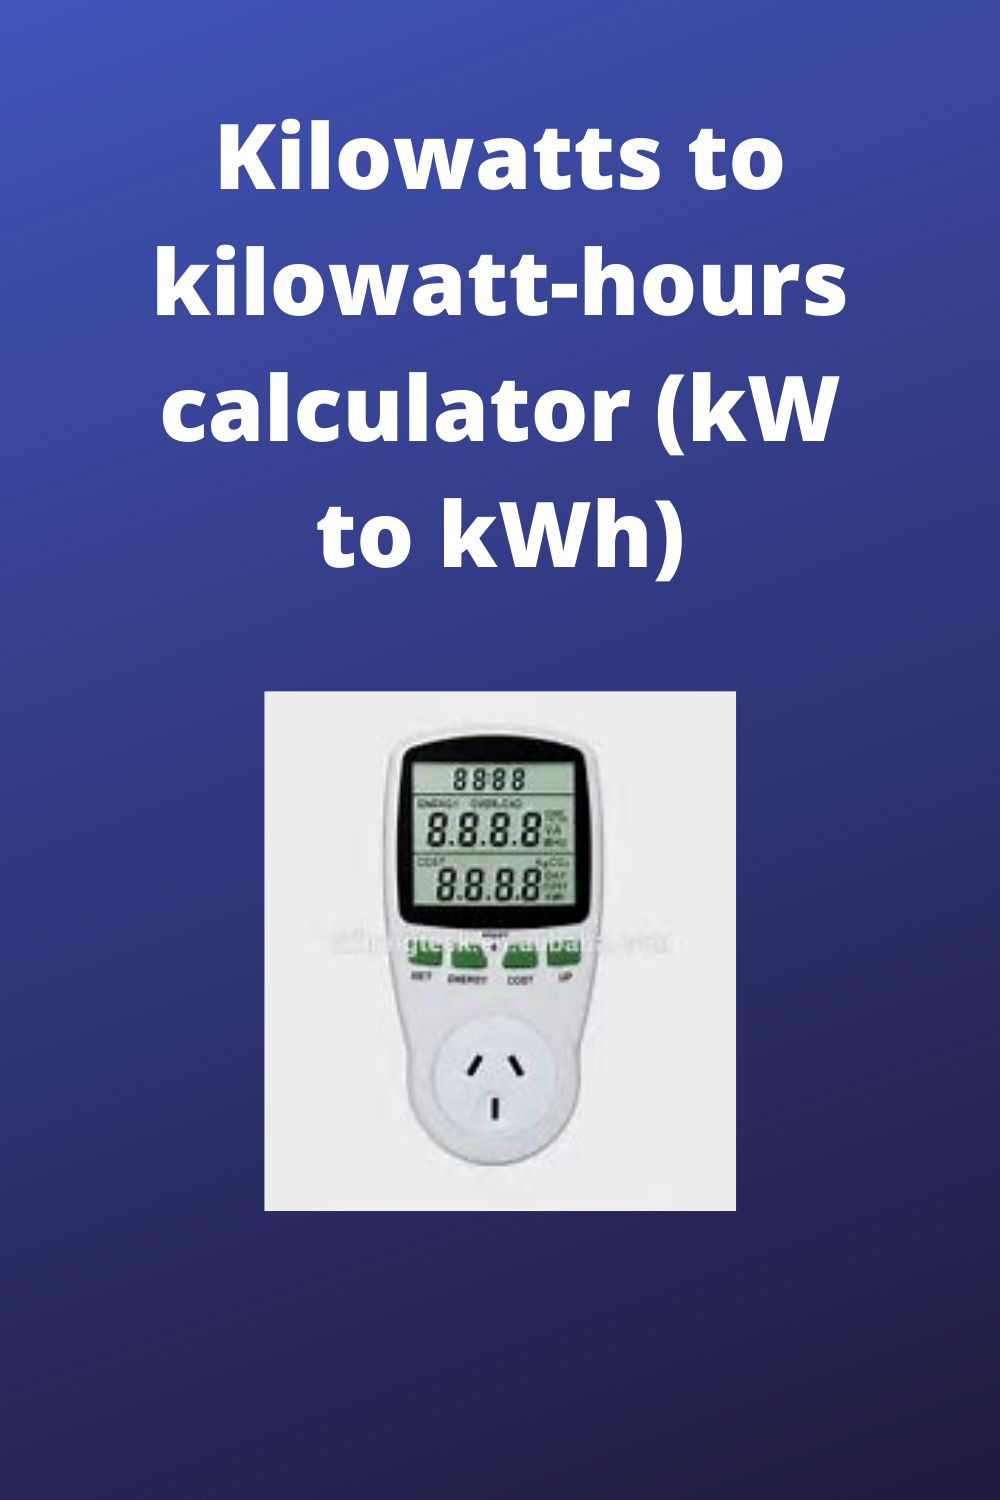 kw calculator for house